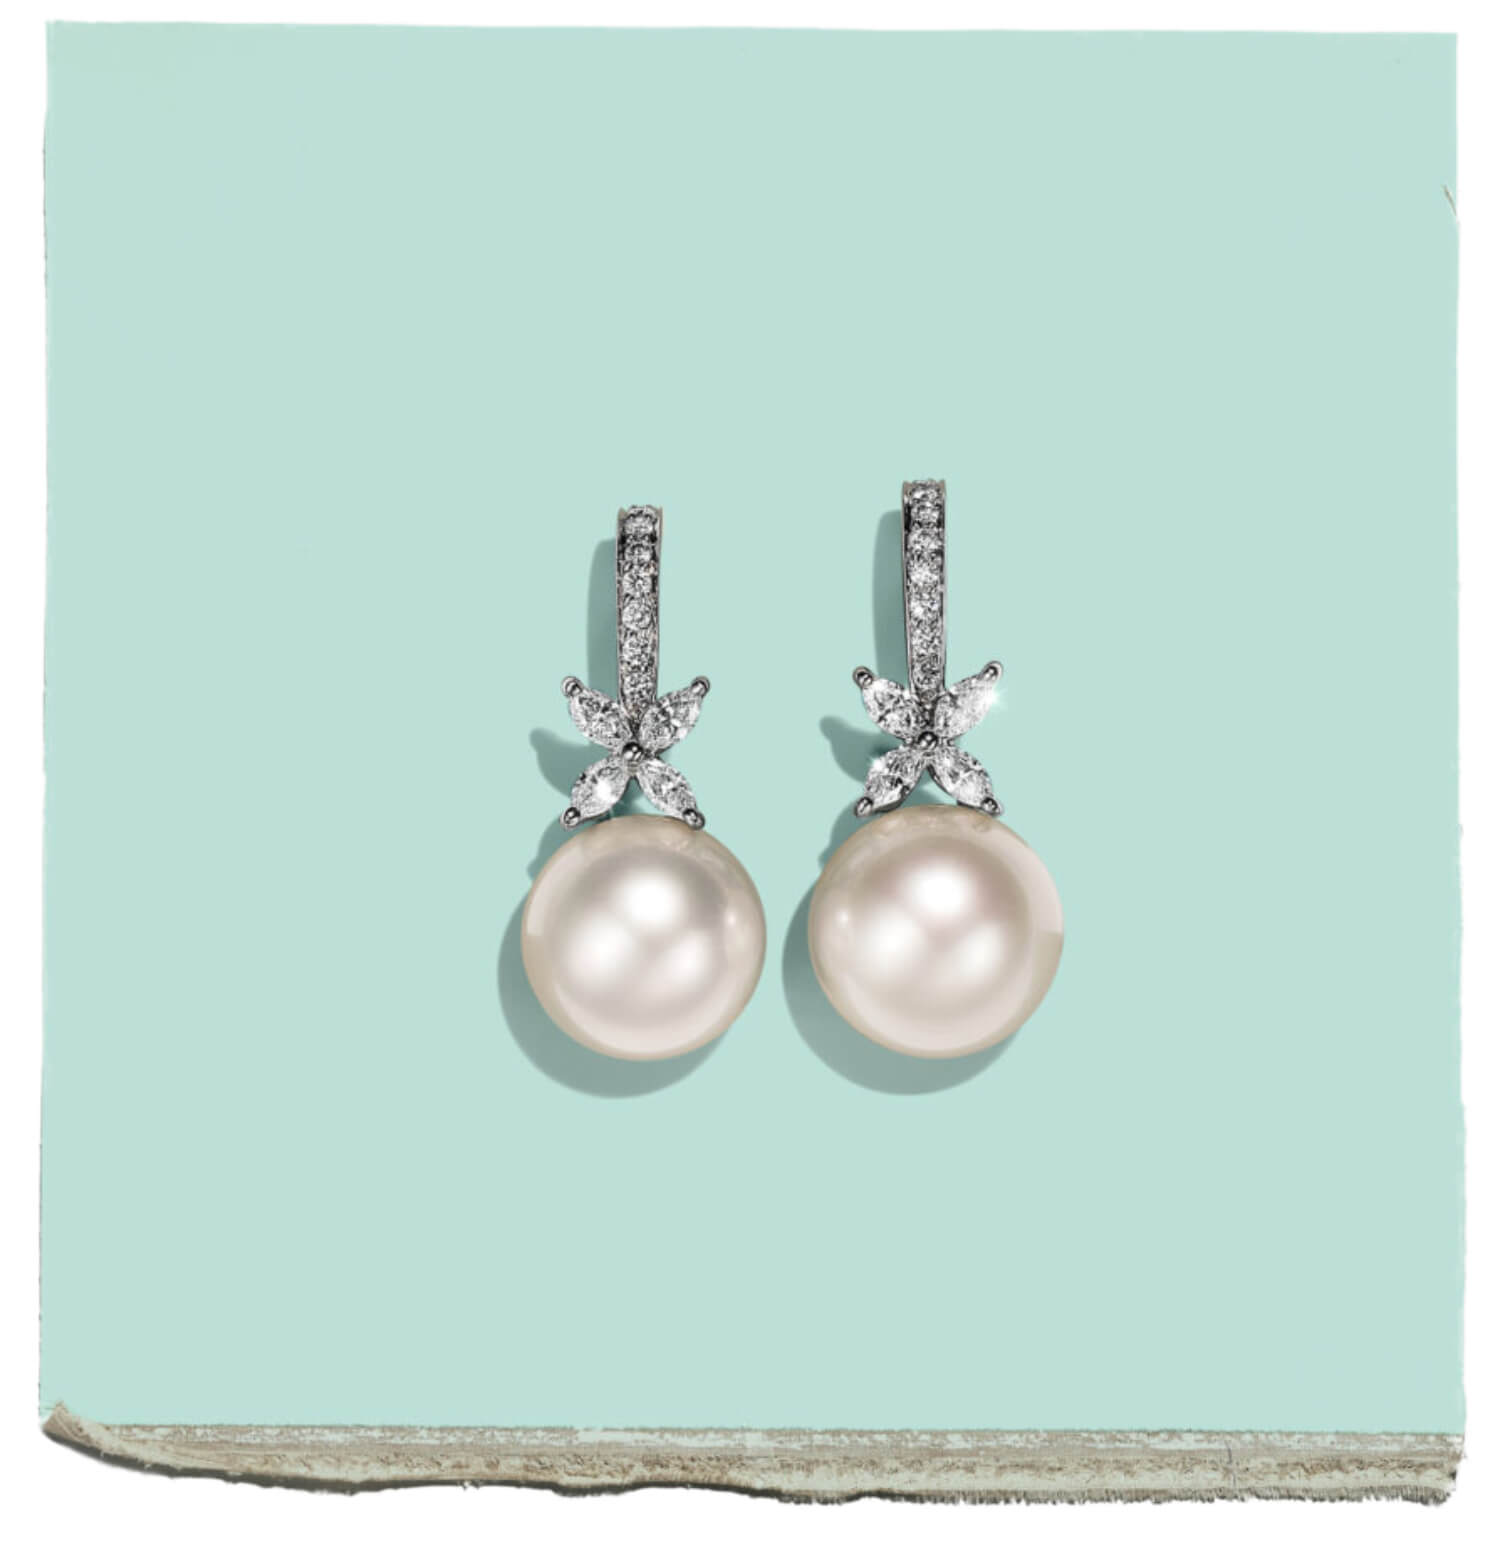 Tiffany-Victoria-Earrings-in-Platinum-with-South-Sea-Pearls-and-Diamonds_Valentines-Day